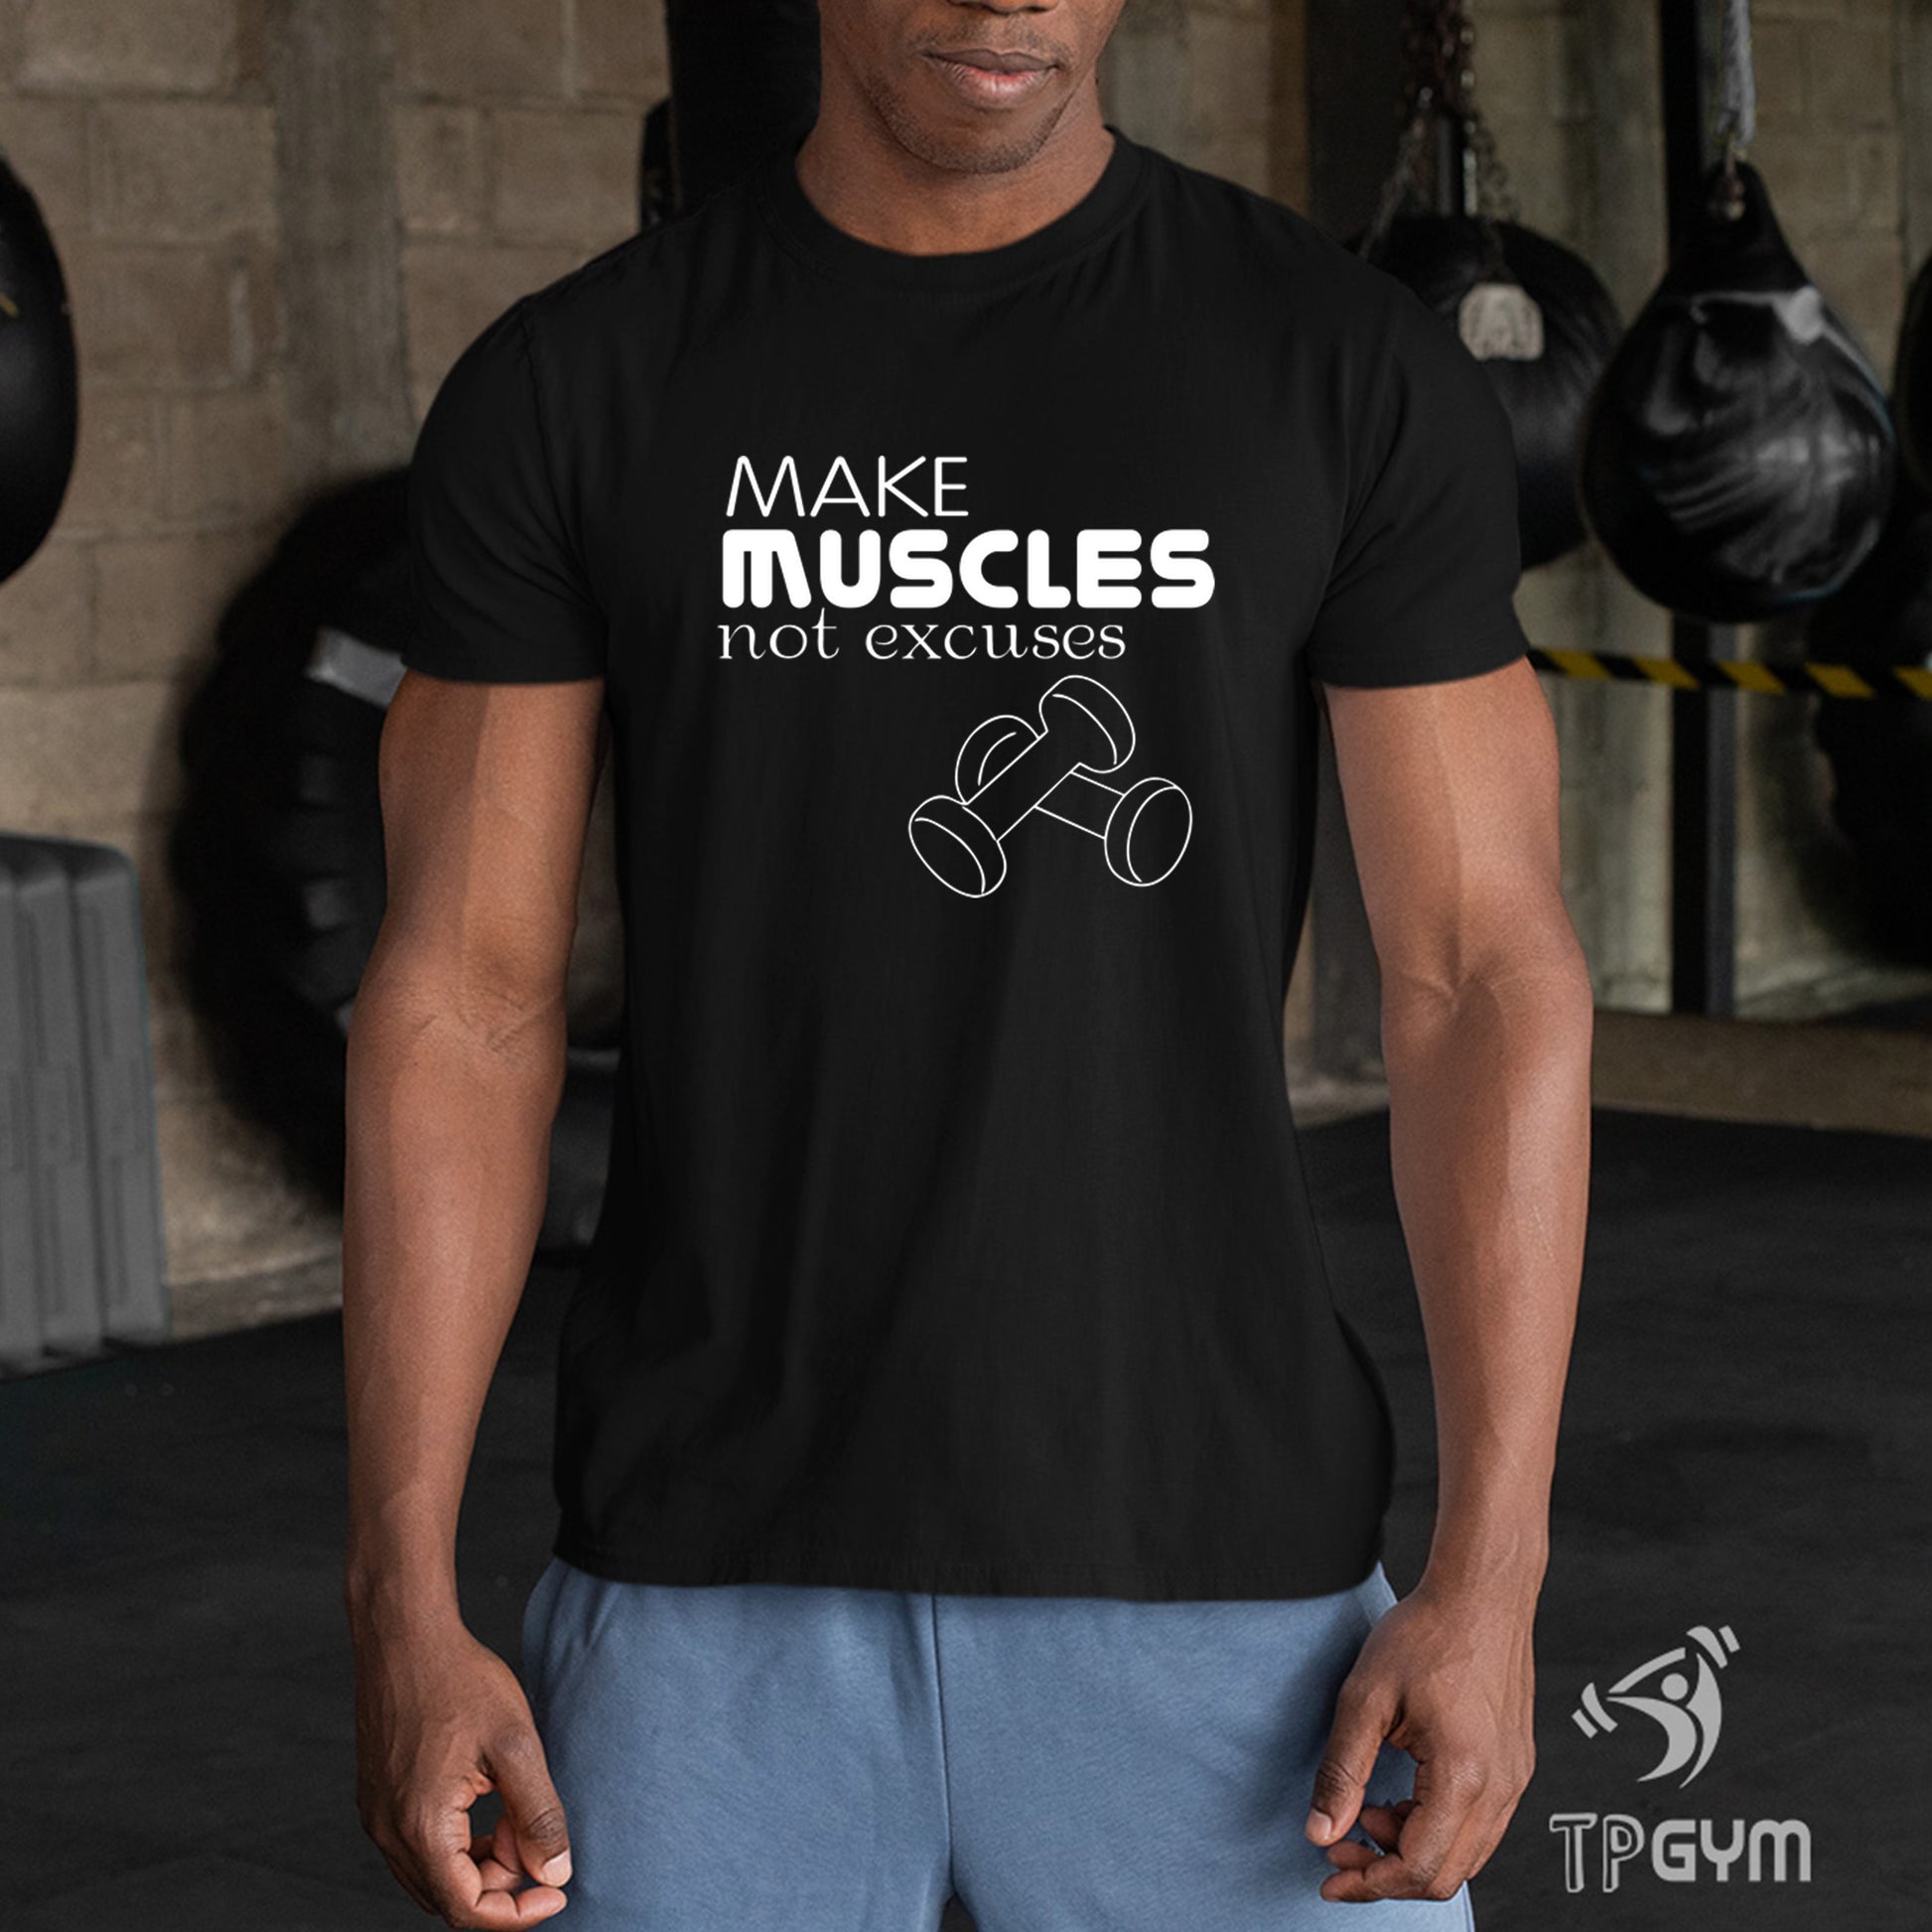 Gym Fitness Crossfit T Shirt Make Muscles Not Excuses